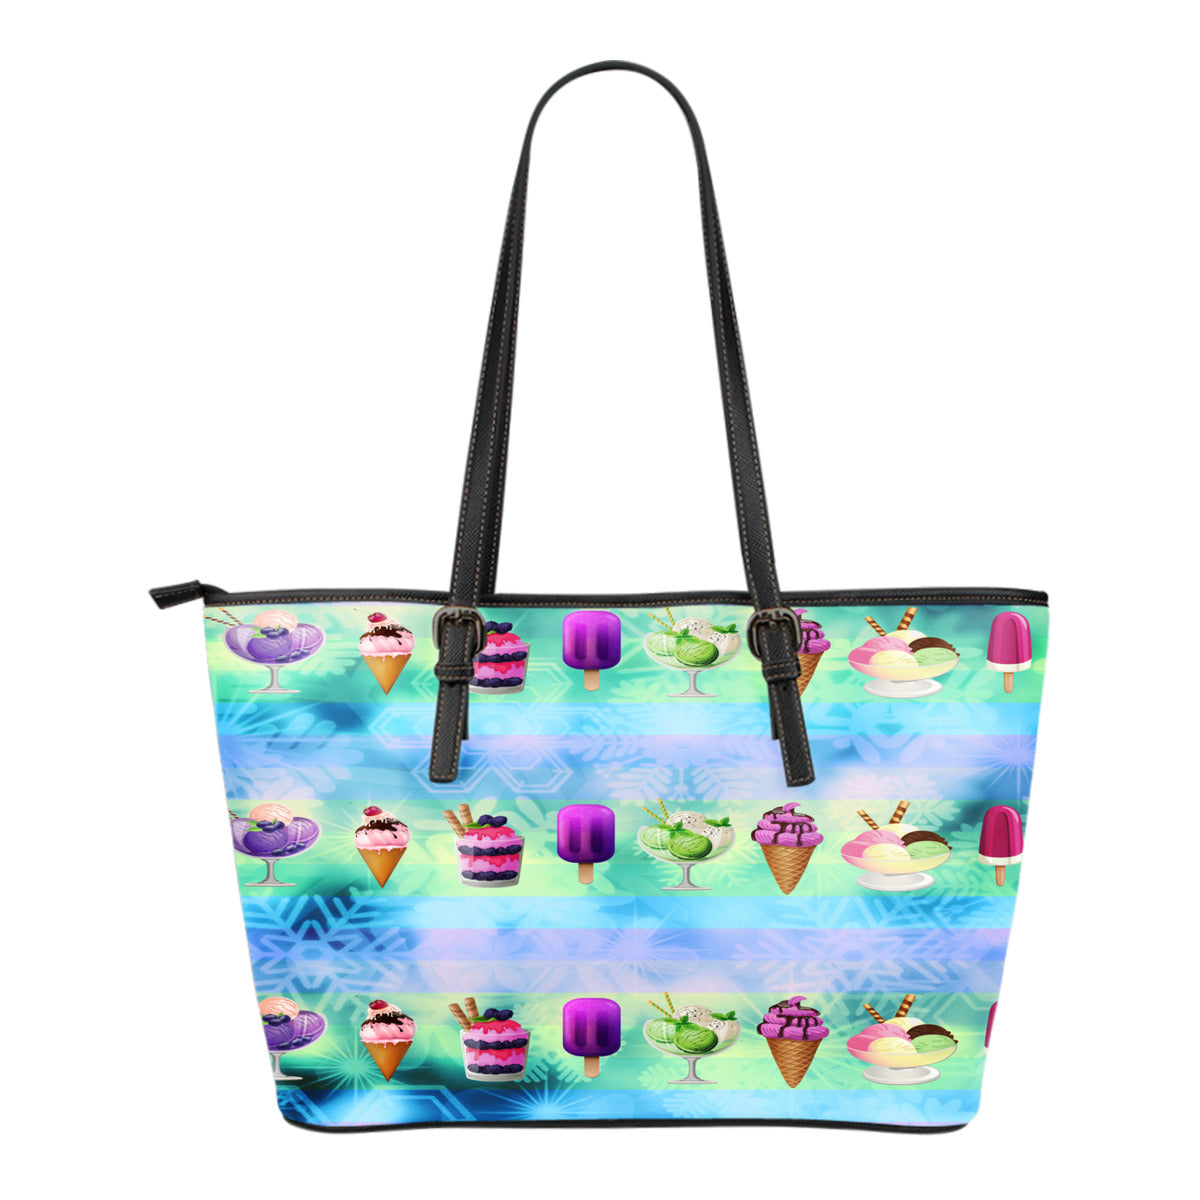 Ice Cream Themed Design C2 Women Small Leather Tote Bag